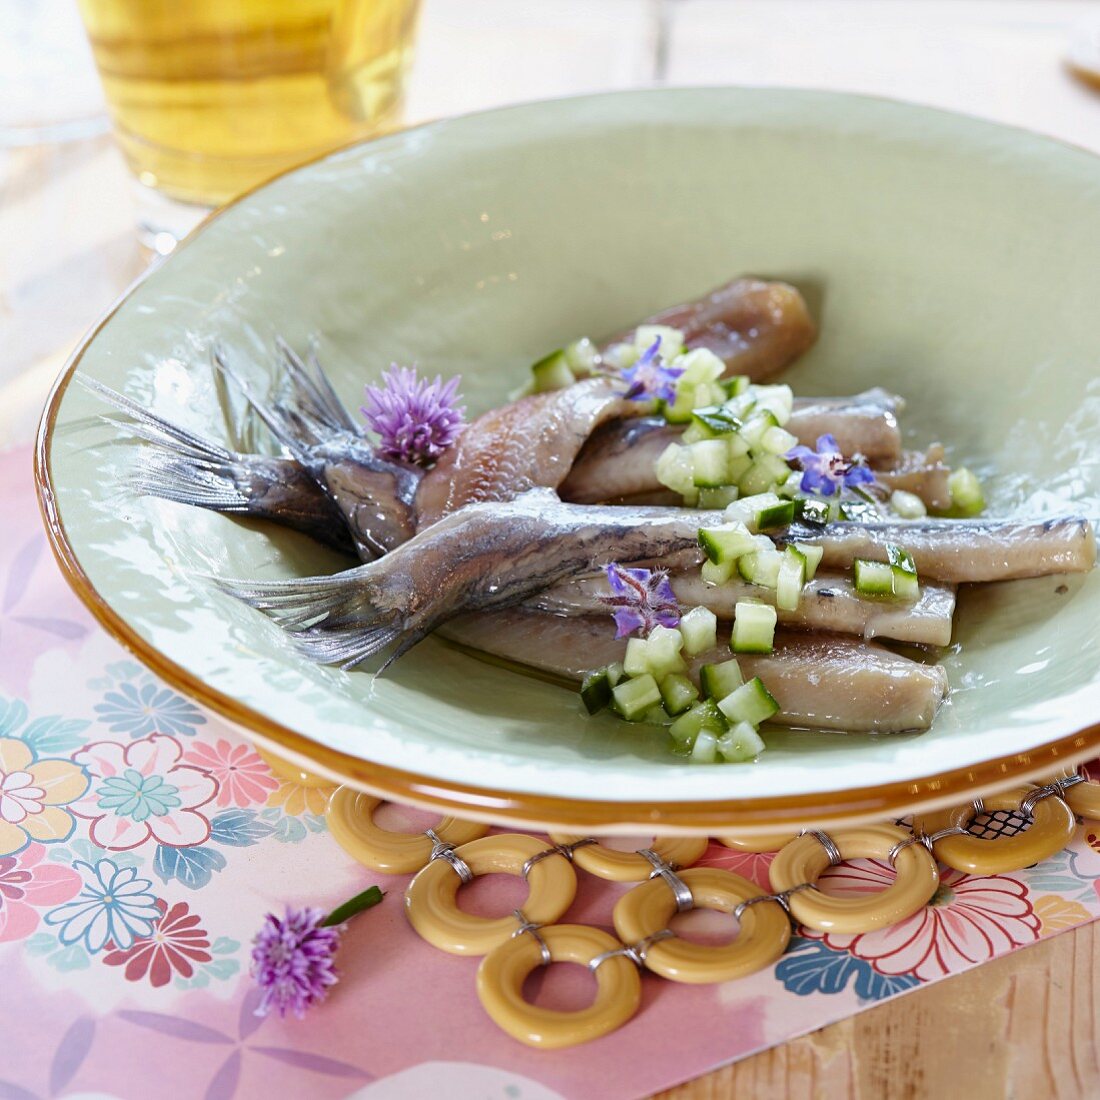 Dutch-style pickled herring with cucumber and herb flowers